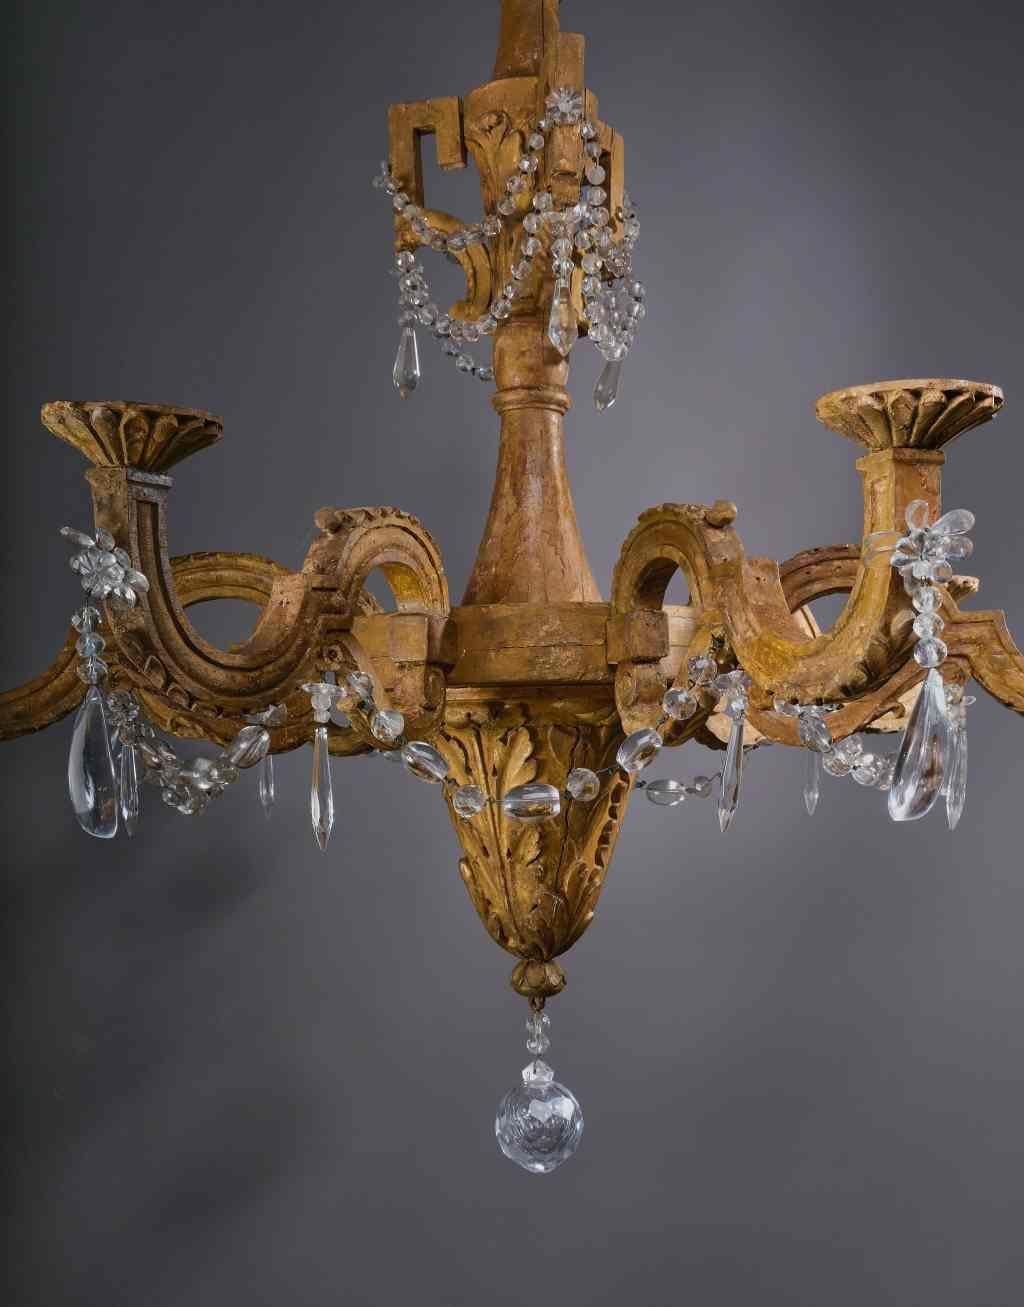 Round baluster shaft decorated with acanthus leaves. Six curved arms decorated with crystal hangings. High fusee with three bars decorated with crystal. Central Italy about 1800. Extremely pure and minimalistic chandelier. The chandelier can be